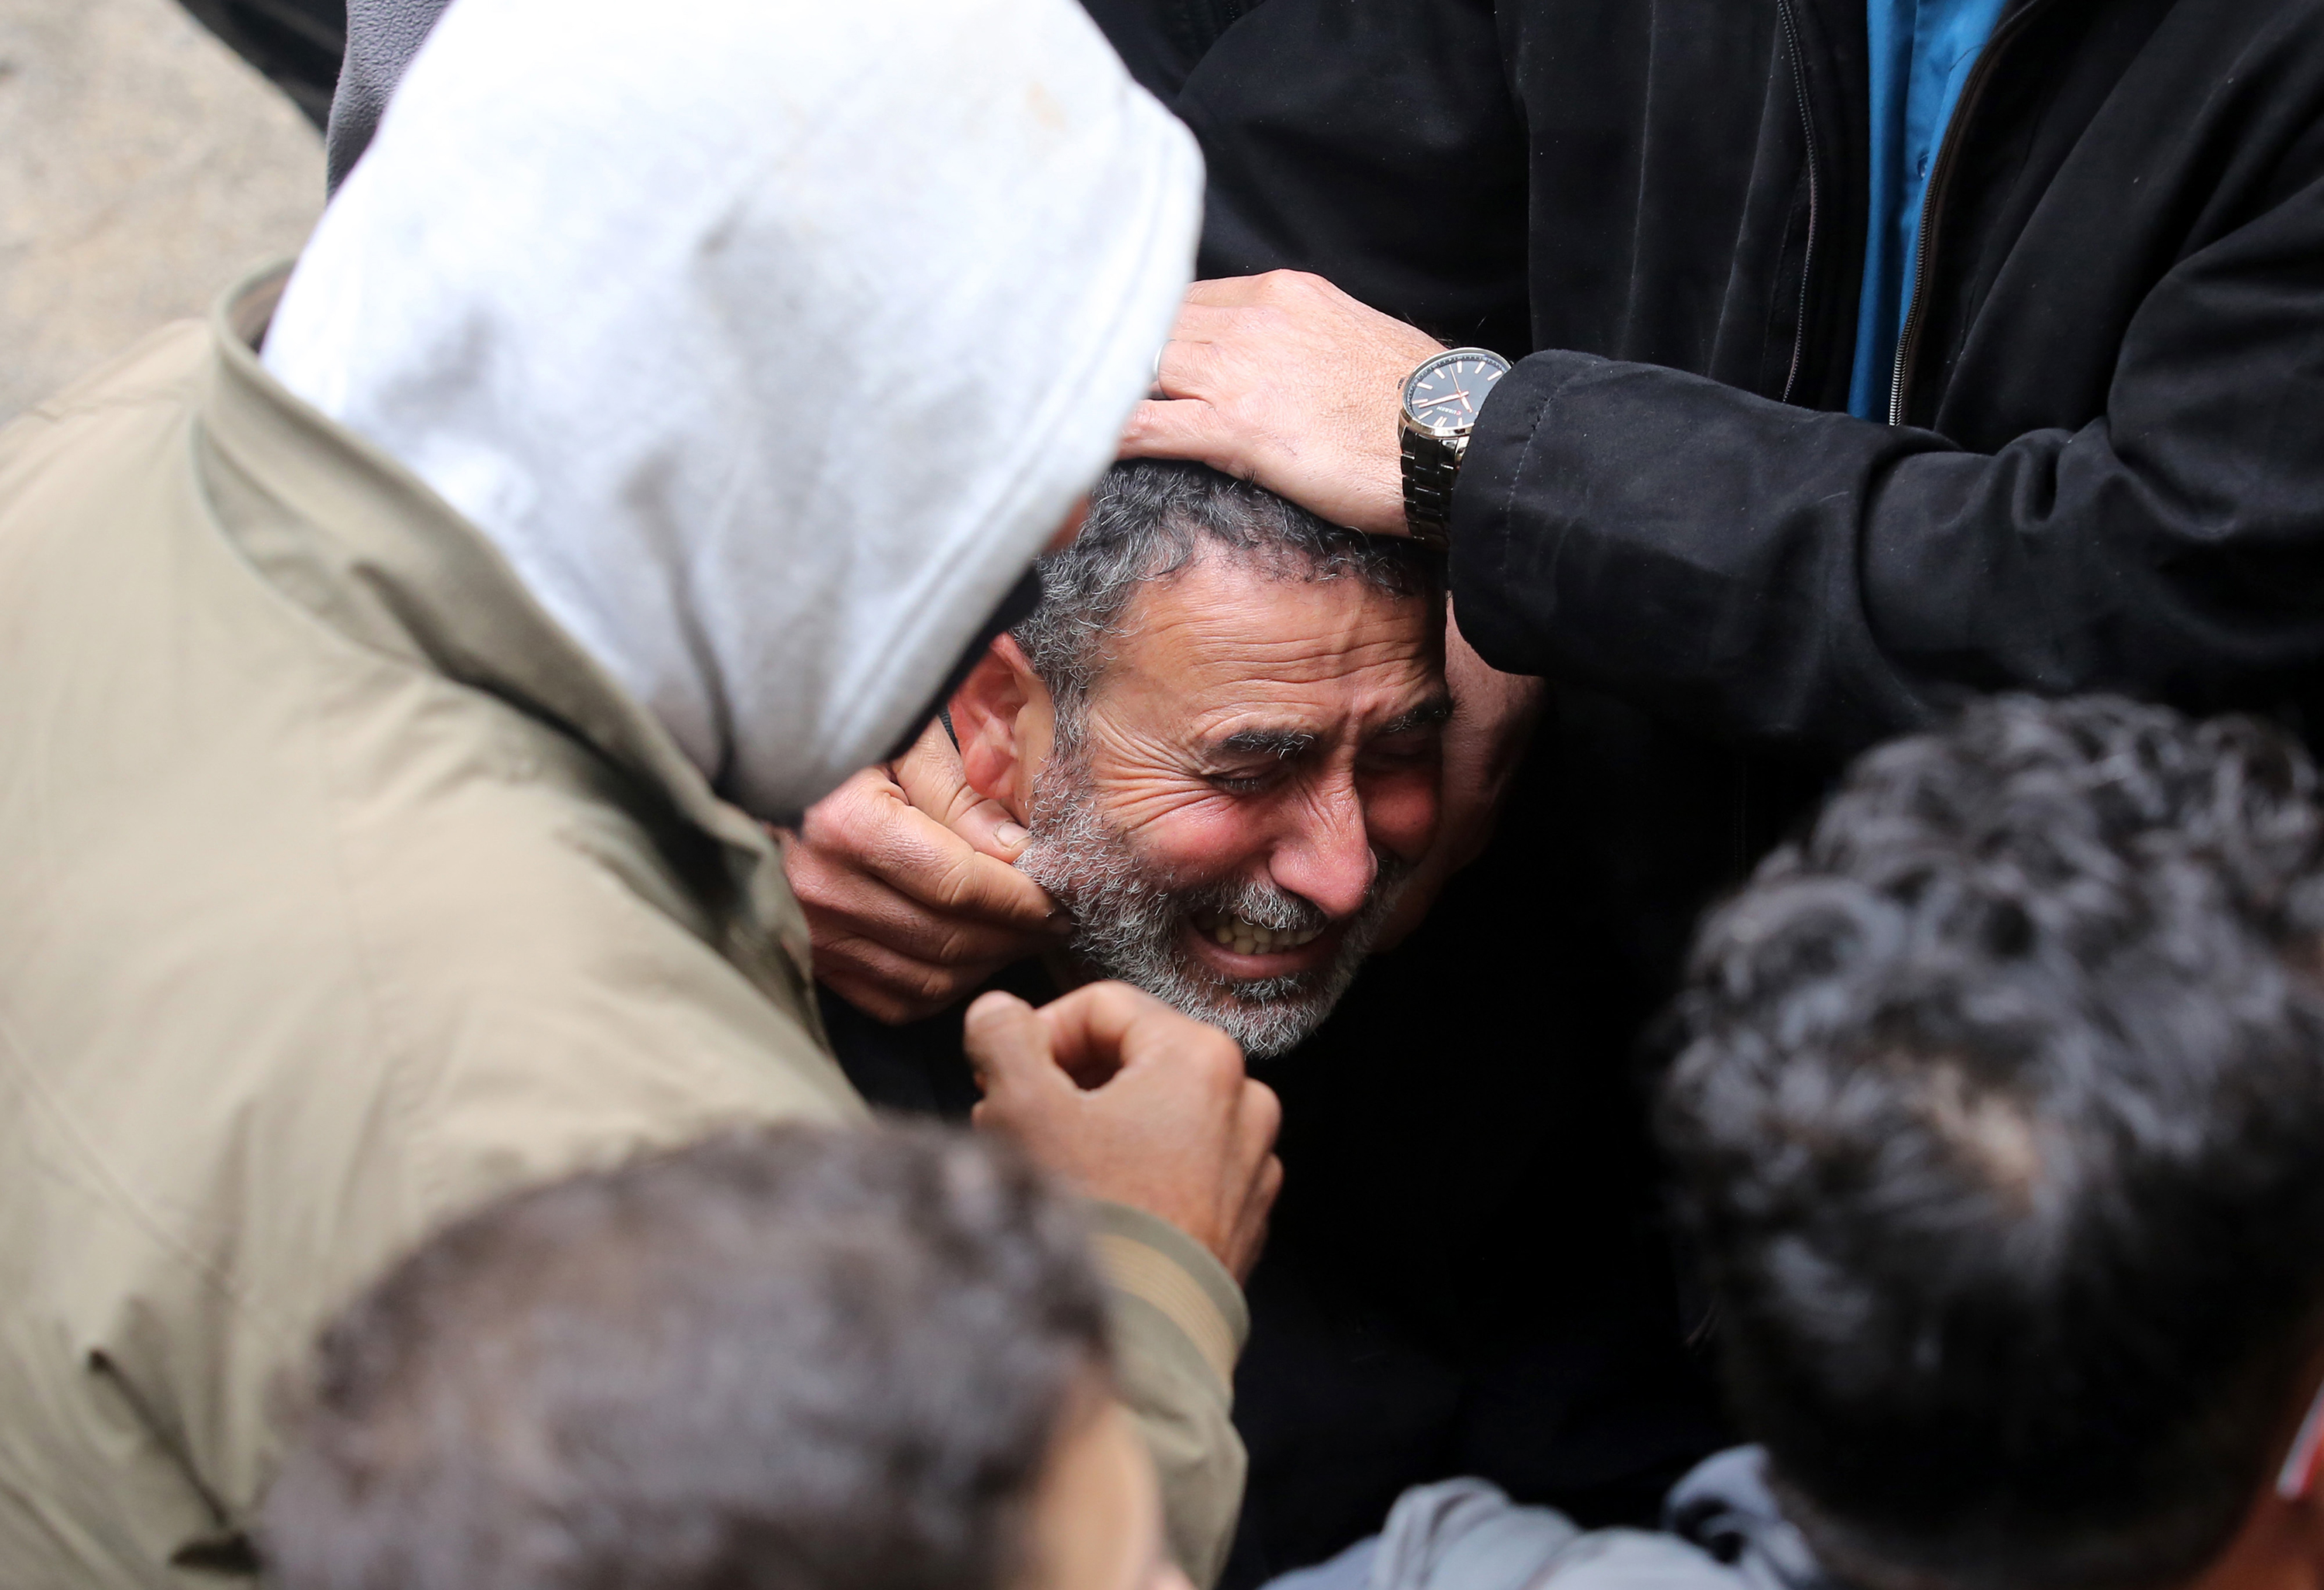 A man mourns as people attend the funeral ceremony of 3 Palestinians, killed during the Israeli raid into the Ibn Sina Hospital in Jenin, West Bank on January 30.